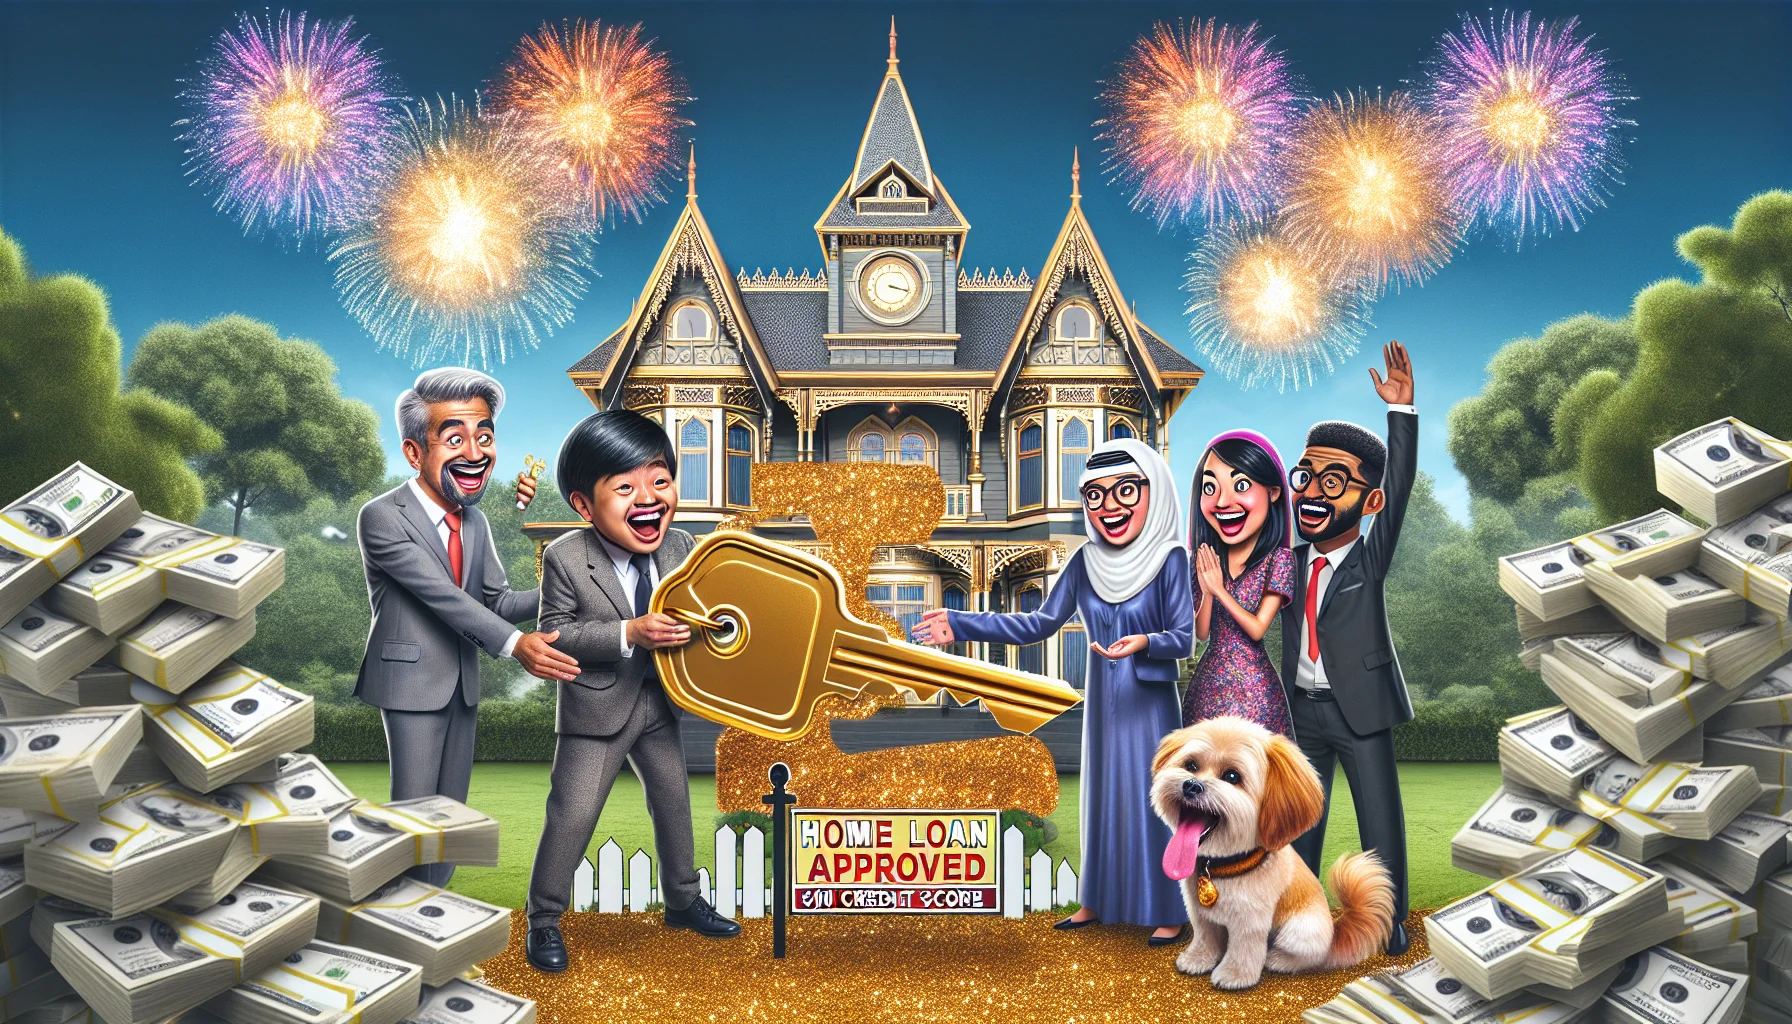 As a quirky depiction of a perfect scenario, picture this: three South Asian banks' representatives, each of a different gender, with big smiles on their faces, presenting an oversized imitation key to a joyful Middle-Eastern woman and a cheerful Caucasian man who have a happy dog jumping around them. A shimmering golden banner above reads 'Home Loan Approved, 500 Credit Score.' In the background, a stunning Victorian-style mansion basking in celebratory fireworks provides a picturesque view. There is a sign in front beautifully spelling 'Sold', while stacks of coins and dollar bills surround the scene as an exaggeration of their good fortune.